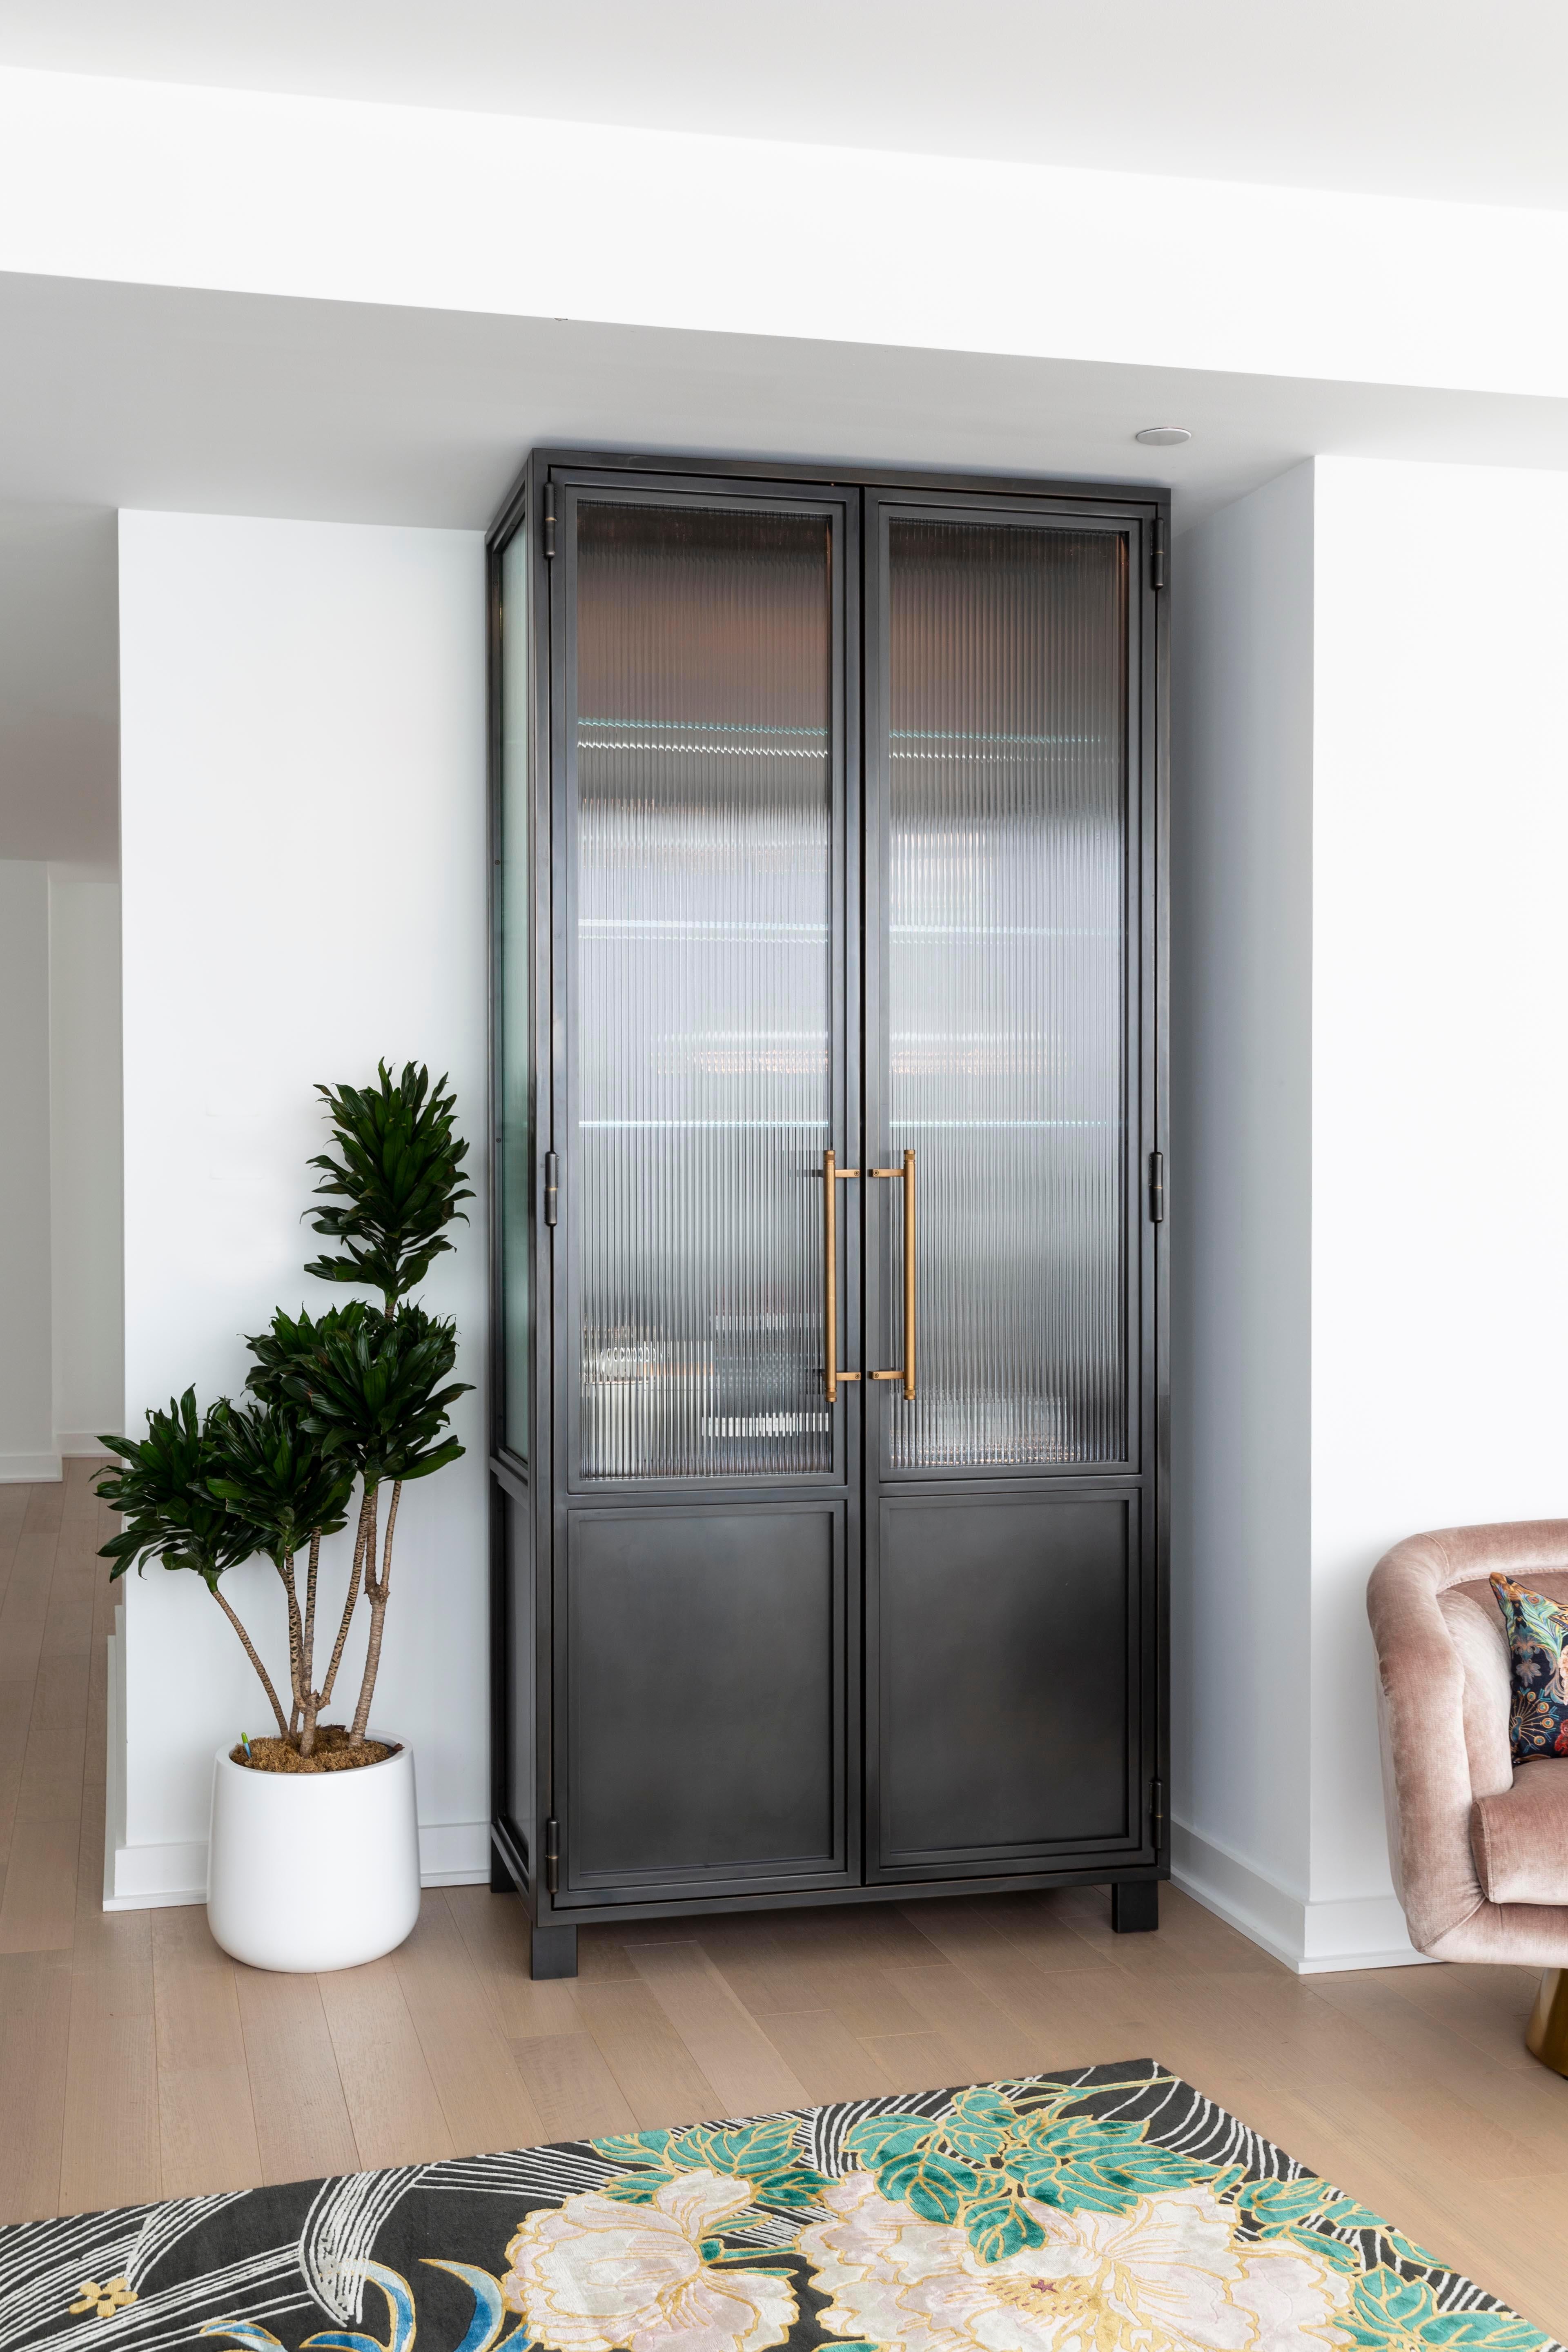 These versatile industrial-inspired cabinets bring strength and character to any space with their over-sized blackened steel and glass doors, framework and custom machined brass pulls. The interior of each cabinet offers truly flexible storage